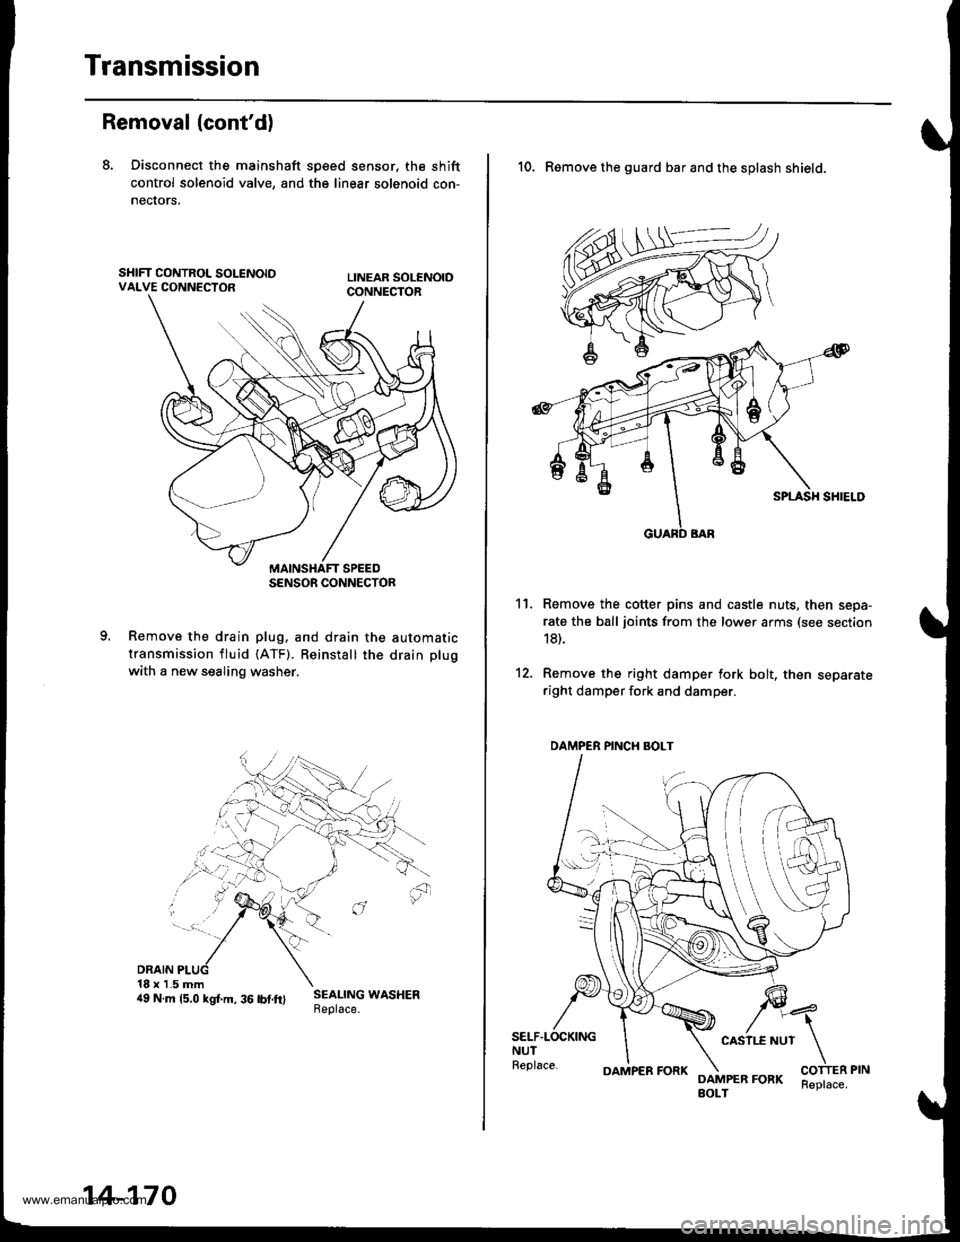 HONDA CR-V 1997 RD1-RD3 / 1.G Service Manual 
Transmission
Removal (contd)
8. Disconnect the mainshaft sp€ed sensor, the shift
control solenoid valve, and the linear solenoid con-
necrors,
Remove the drain plug. and drain the automatic
transm